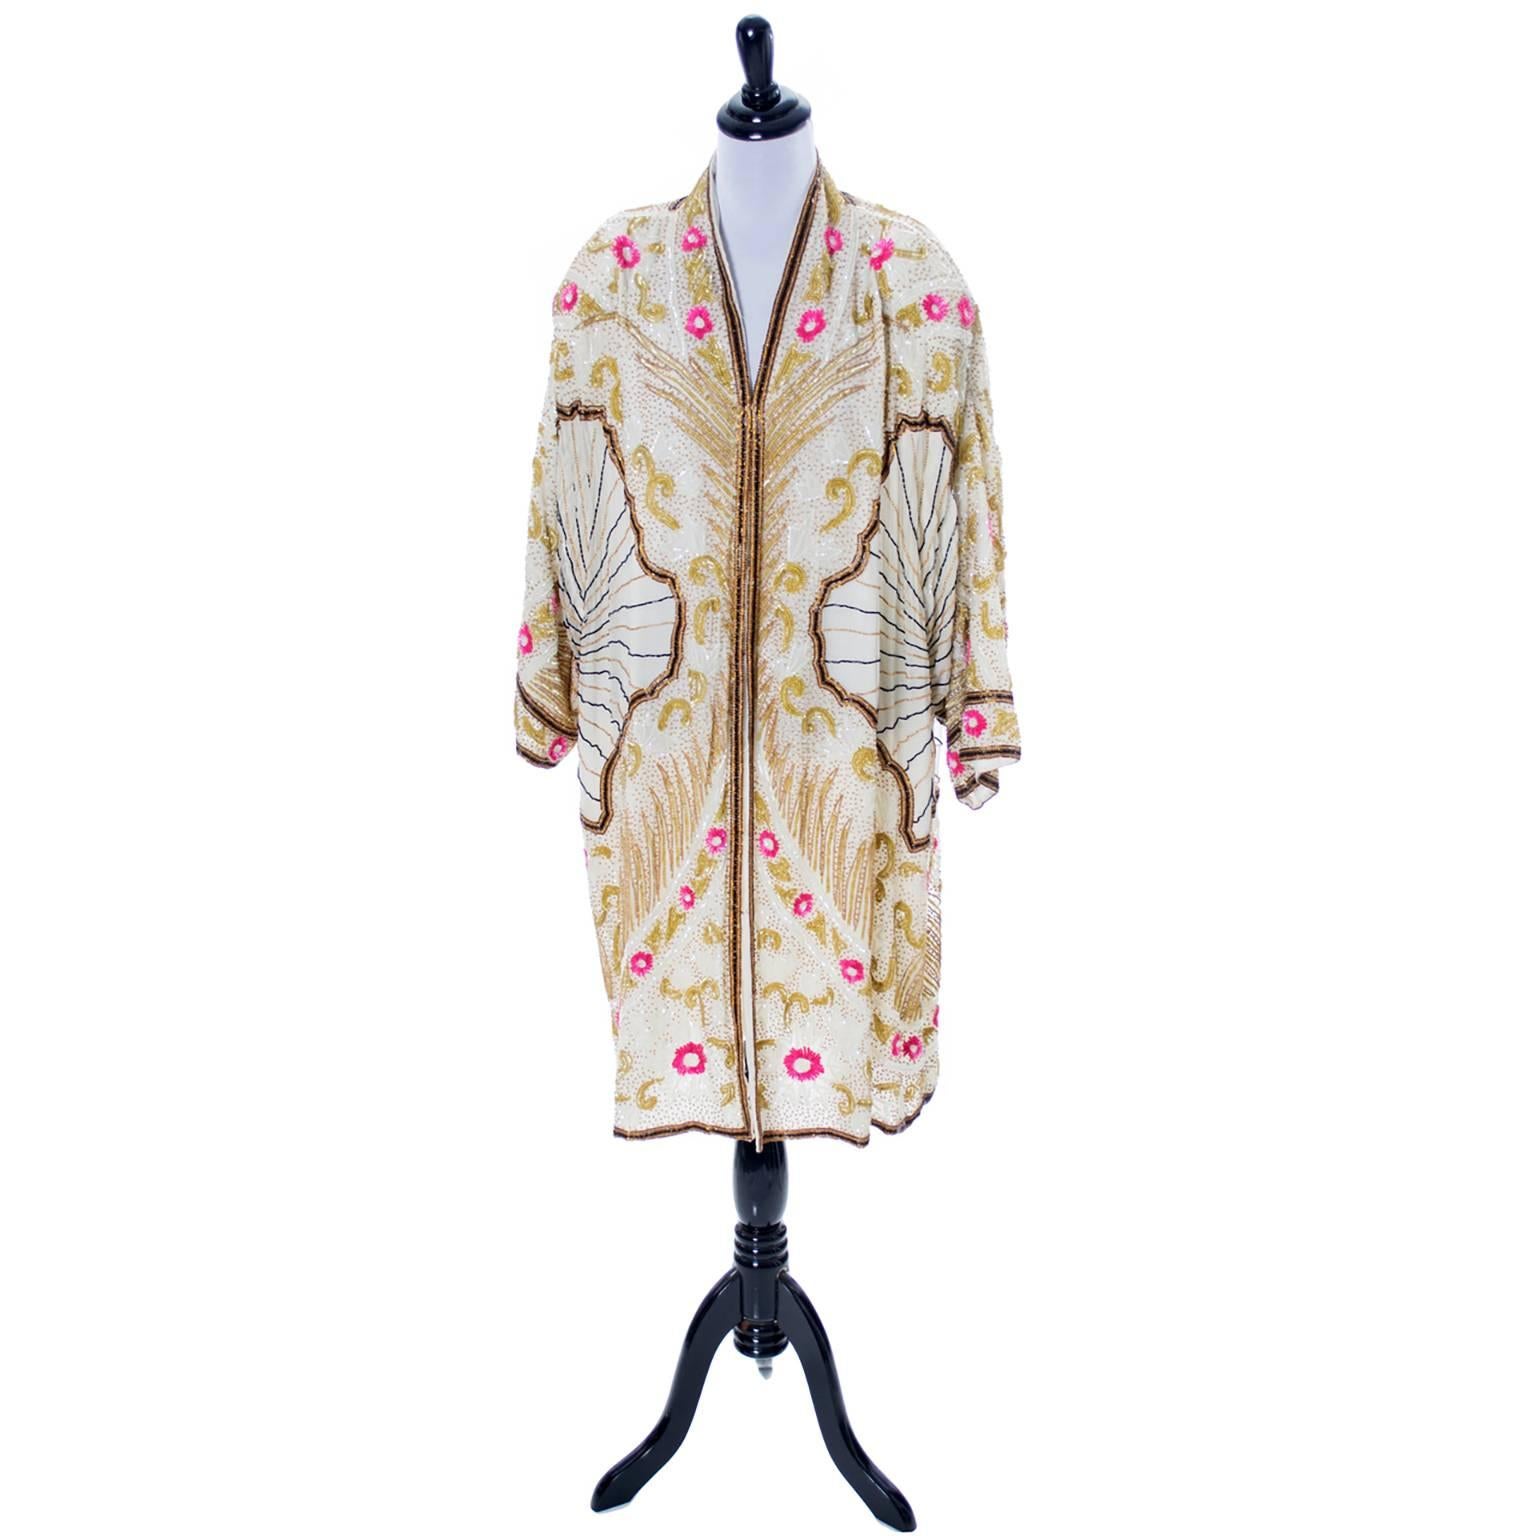 This incredible vintage Birjand Gunit heavily beaded evening coat was purchased in the 1980's but is similar in style to the beaded coats that flappers wore in the 1920's. The coat has rayon lining and measures  39